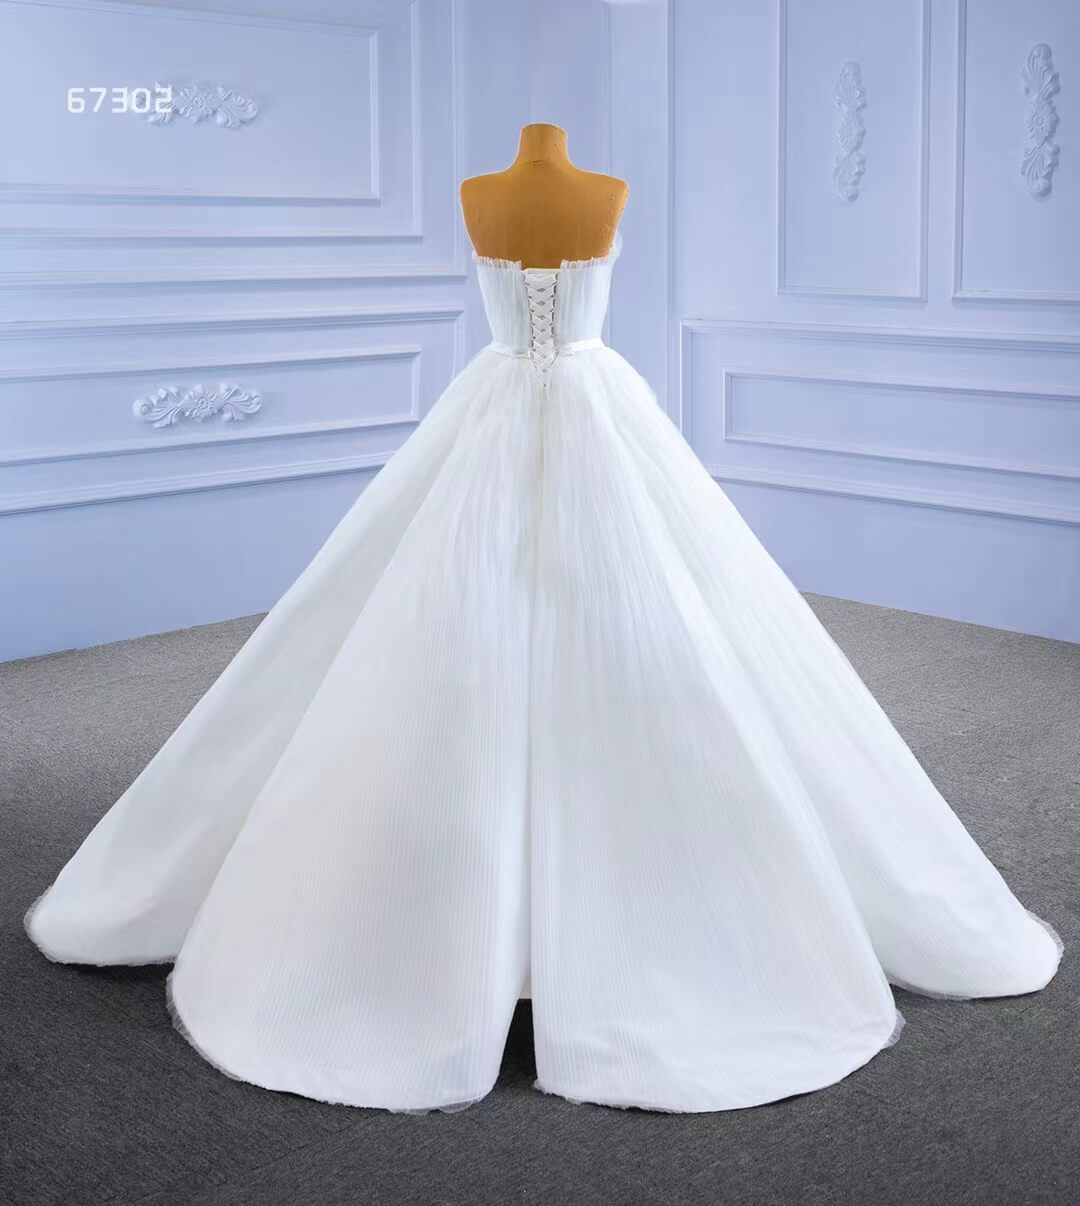 Haute Couture Wedding Gown Strapless Tulle Wedding Dresses 67302-wedding dresses-Viniodress-Viniodress